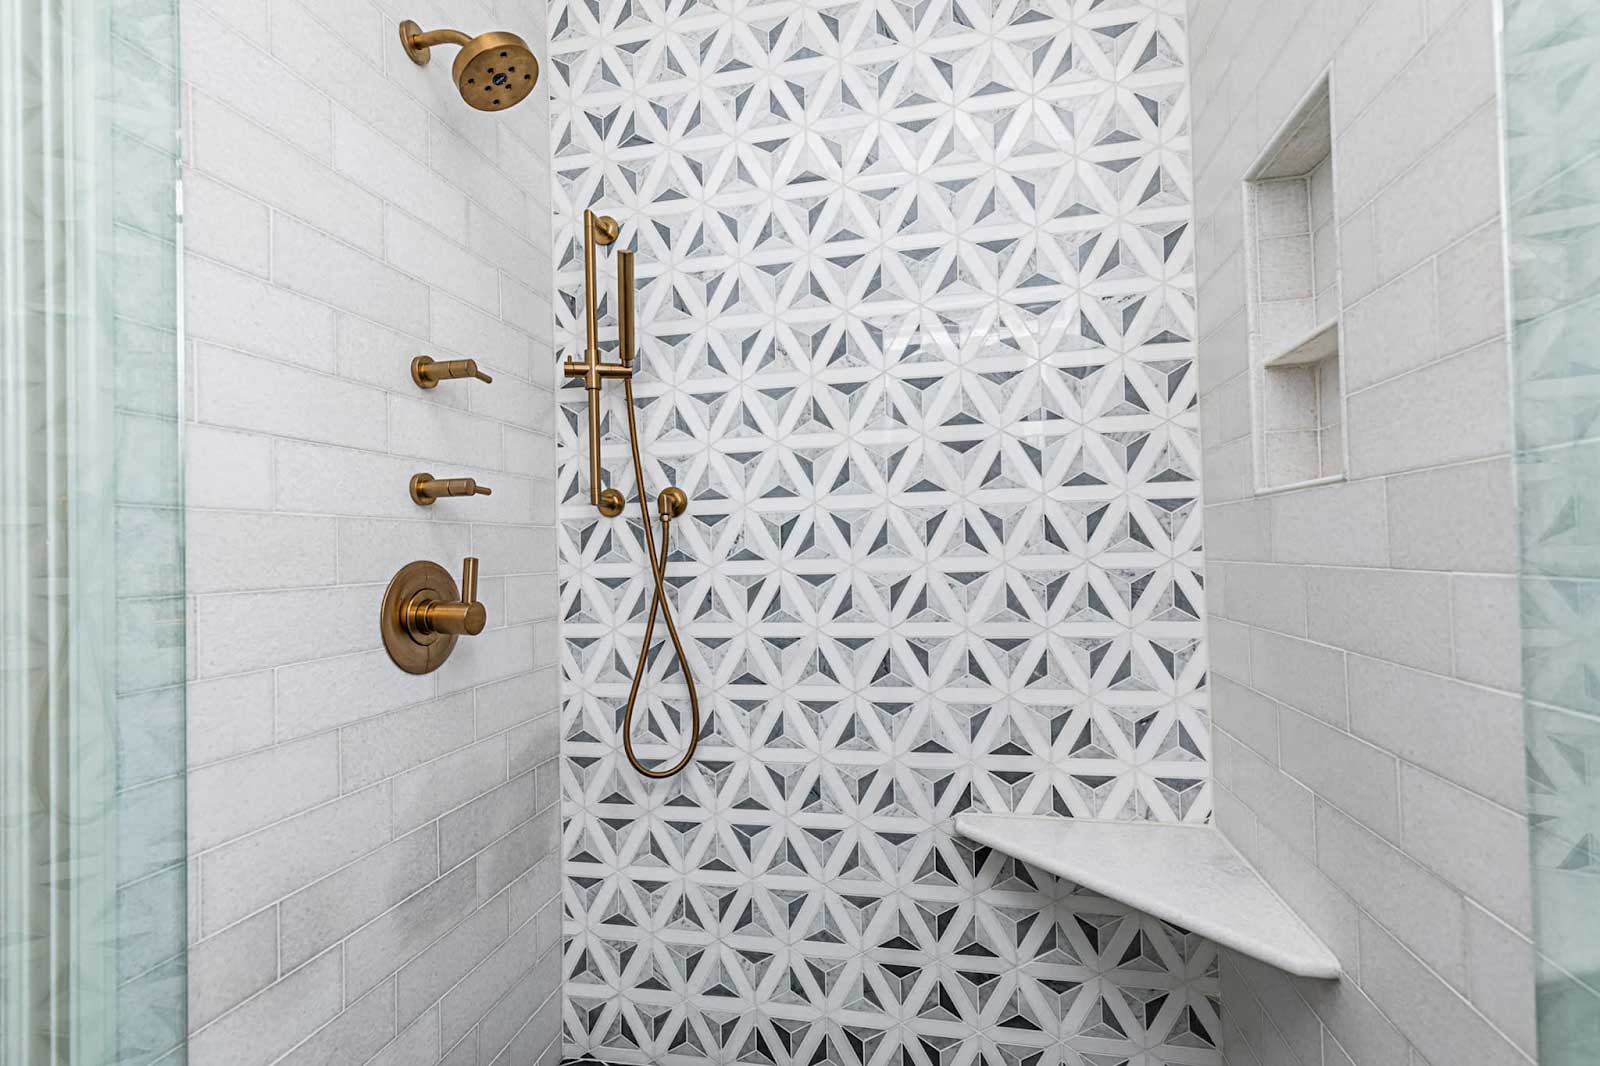 Remodeled shower featuring coordinating copper fixtures, niche, shelf, and a feature wall of patterned tiles